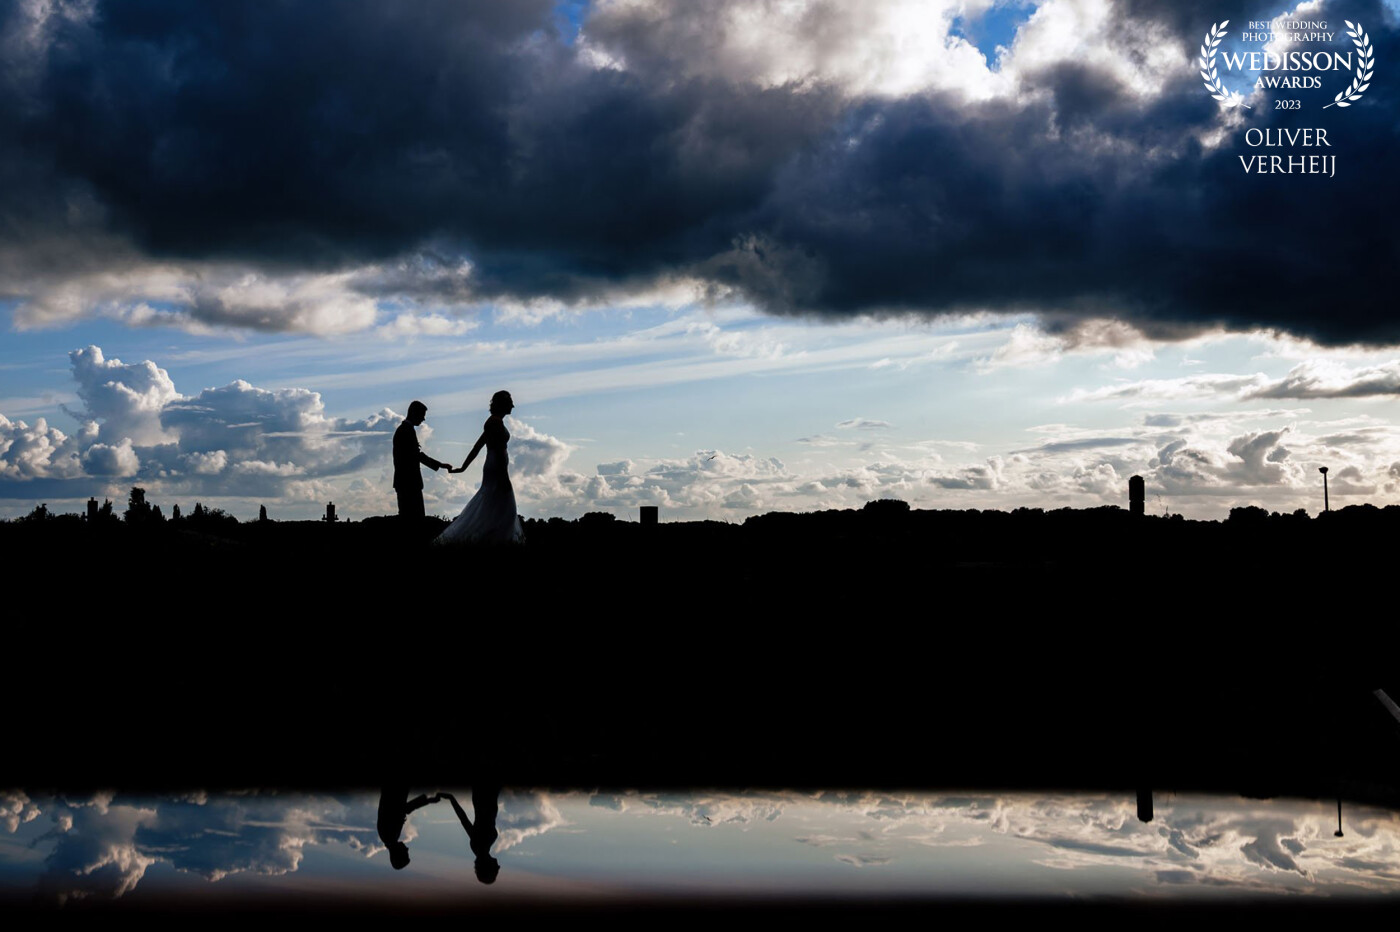 The reflection in the water, the moody clouds and the beautiful couple in this sillhouette make this photo look like a serene painting.